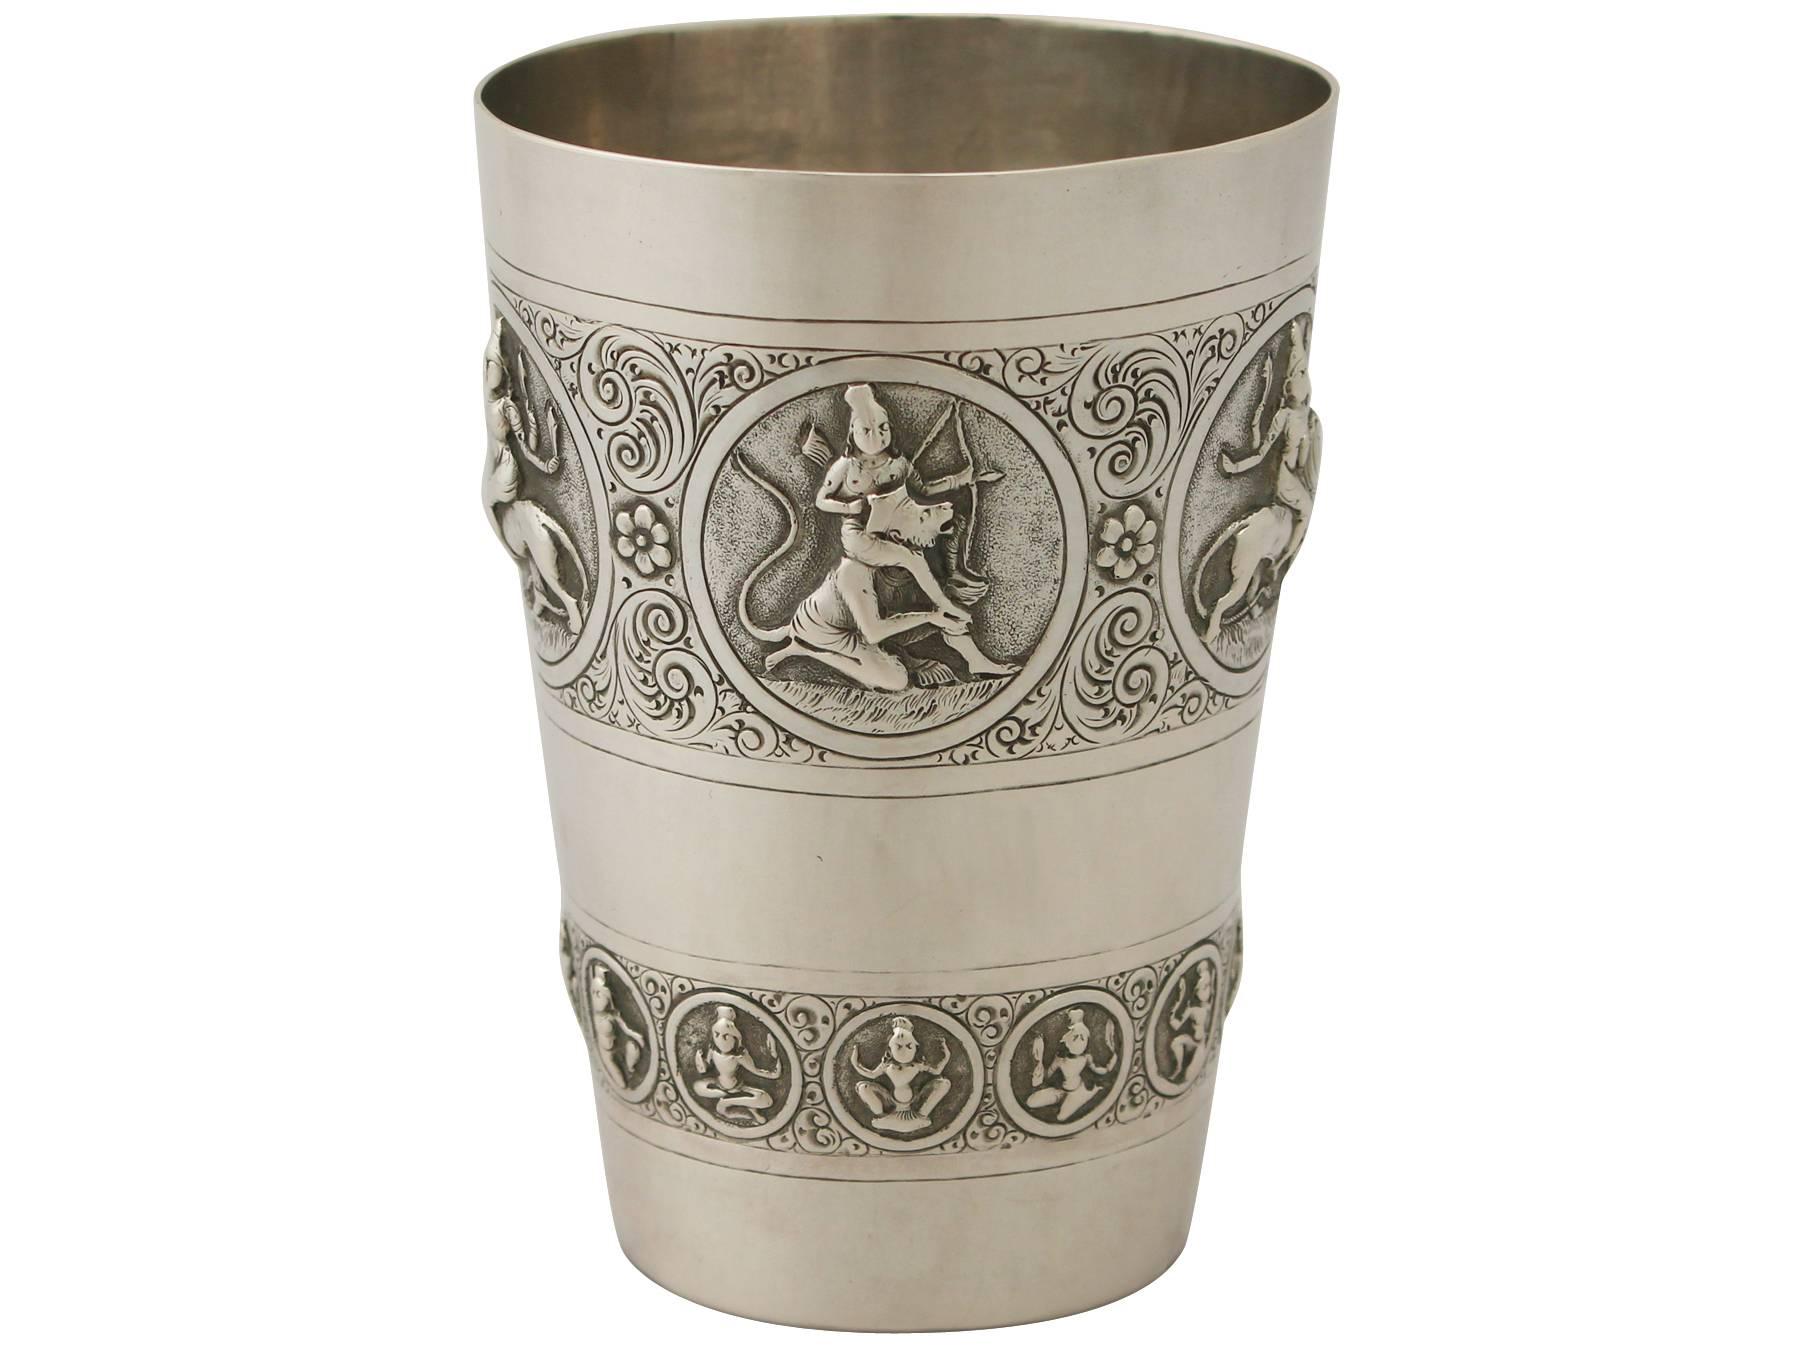 A fine and impressive antique Indian silver beaker, an addition to our Asian silverware collection.

This impressive antique Indian silver beaker has a plain cylindrical, tapering form.

The surface of the beaker is encircled with a broad band